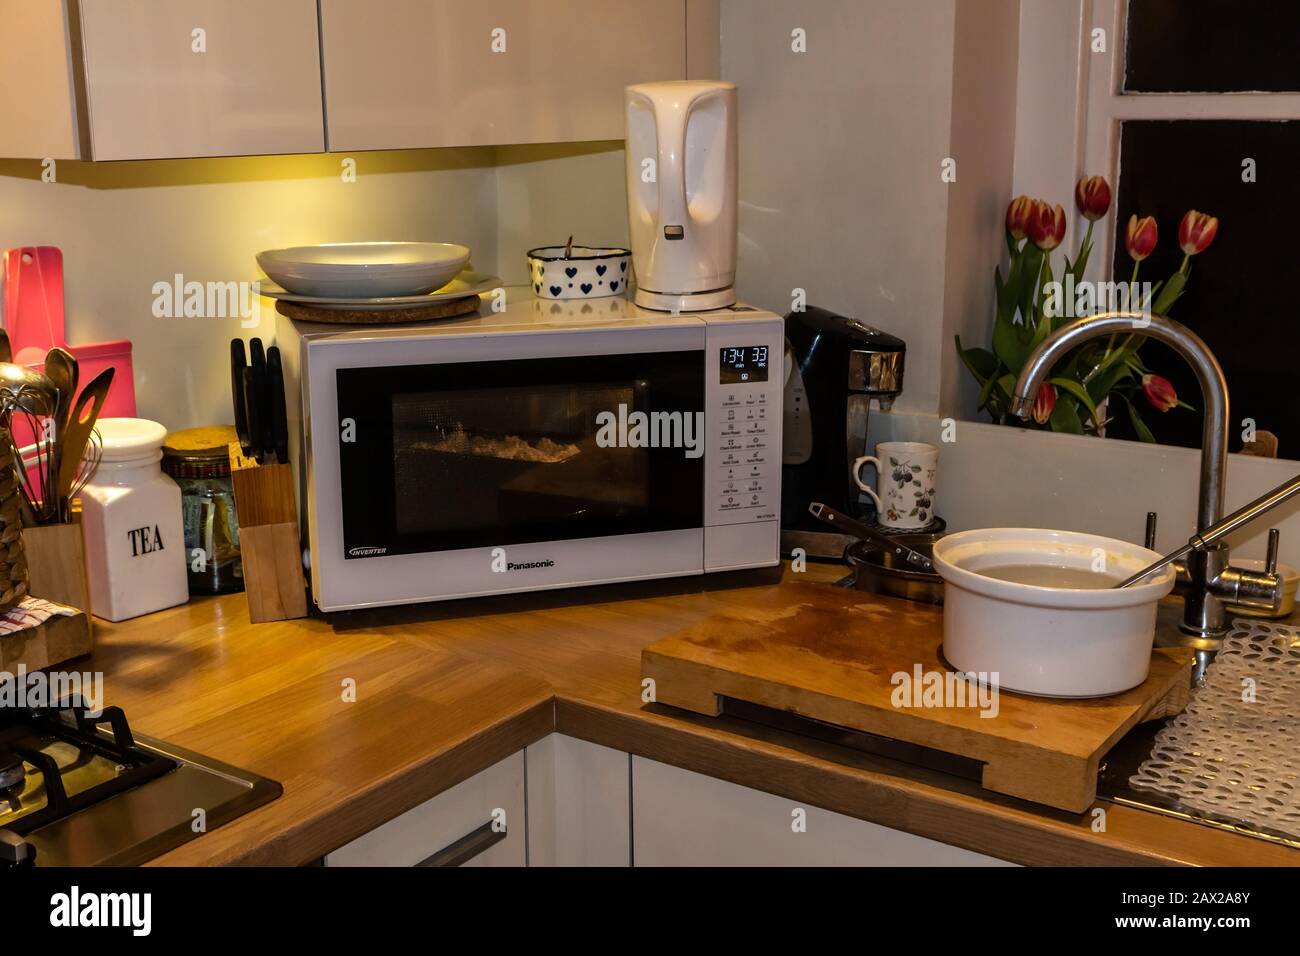 Cooking in a small kitchen- showing both the economical use of space to cook homemade food, alongside its hazards. Stock Photo